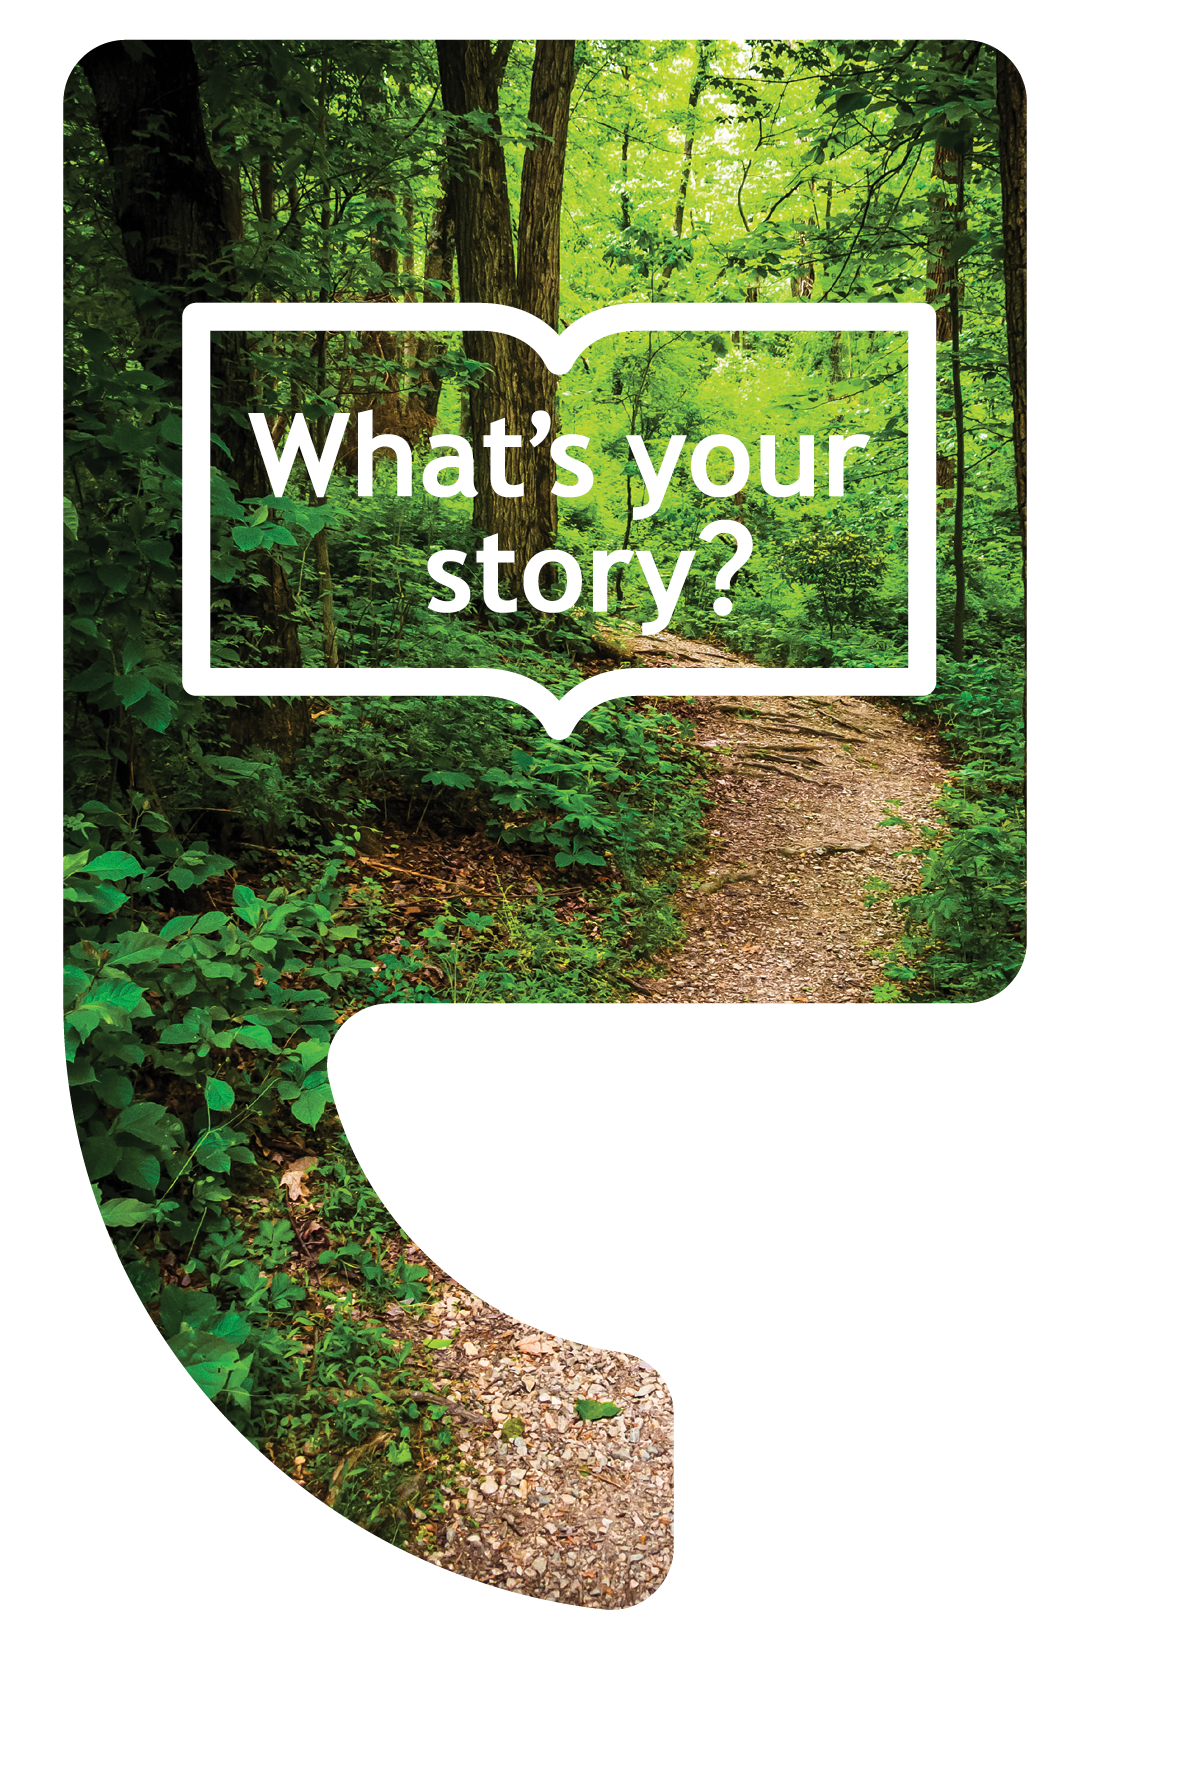 What's Your Story? Quotation annotation, forest path.